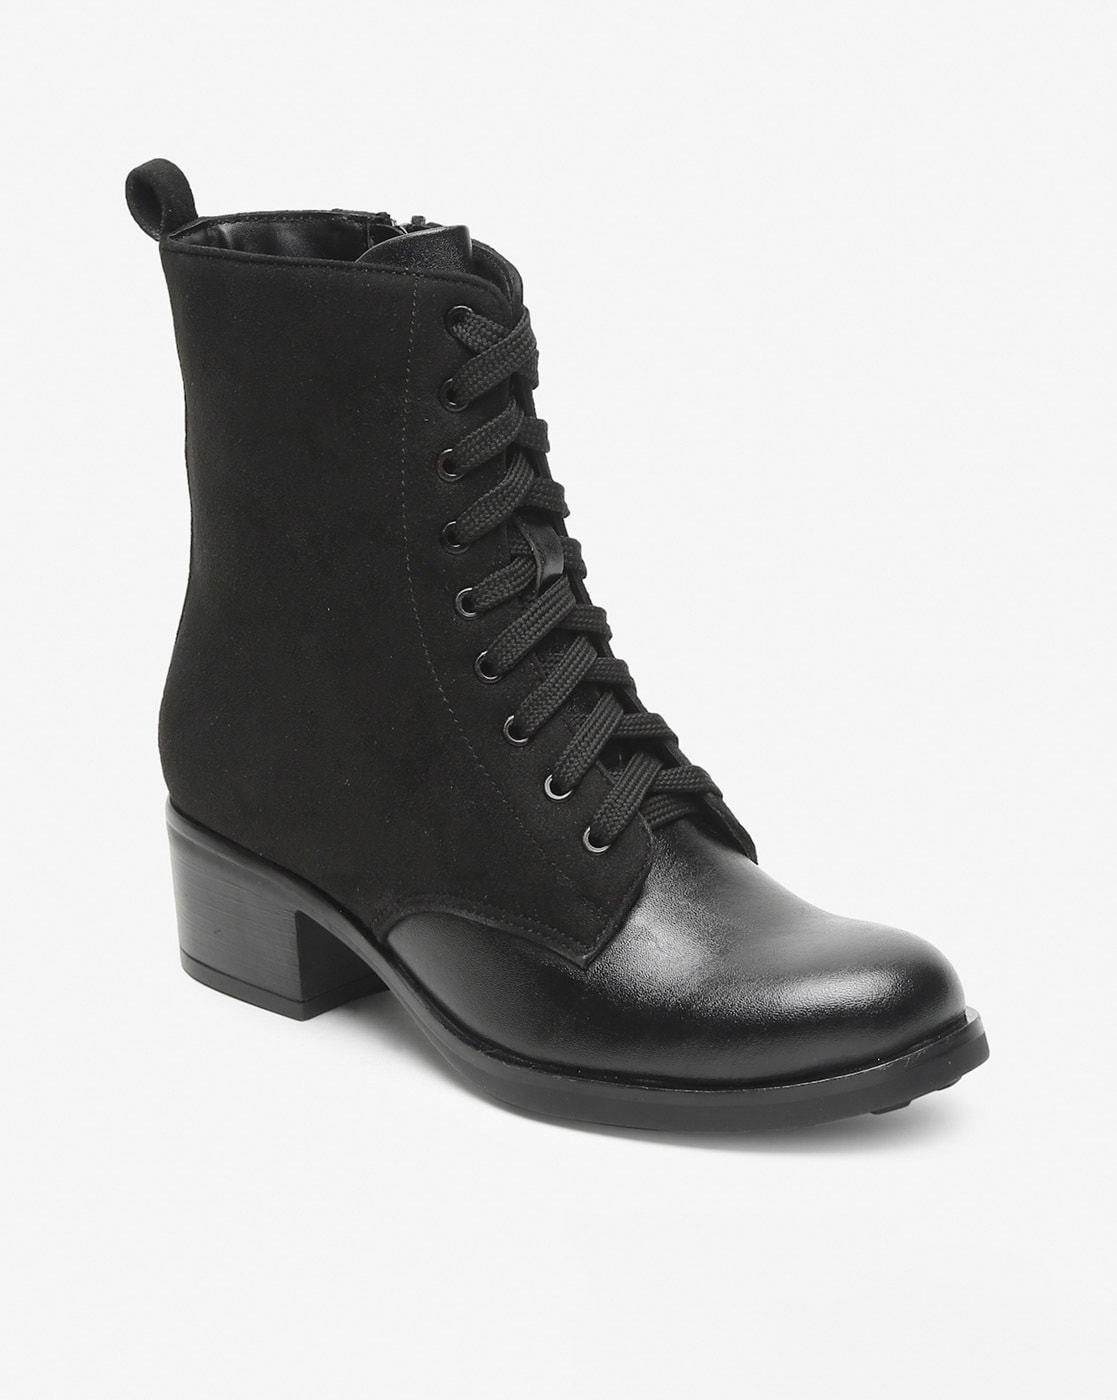 The 10 Types of Boots for Women to Invest In | Marie Claire